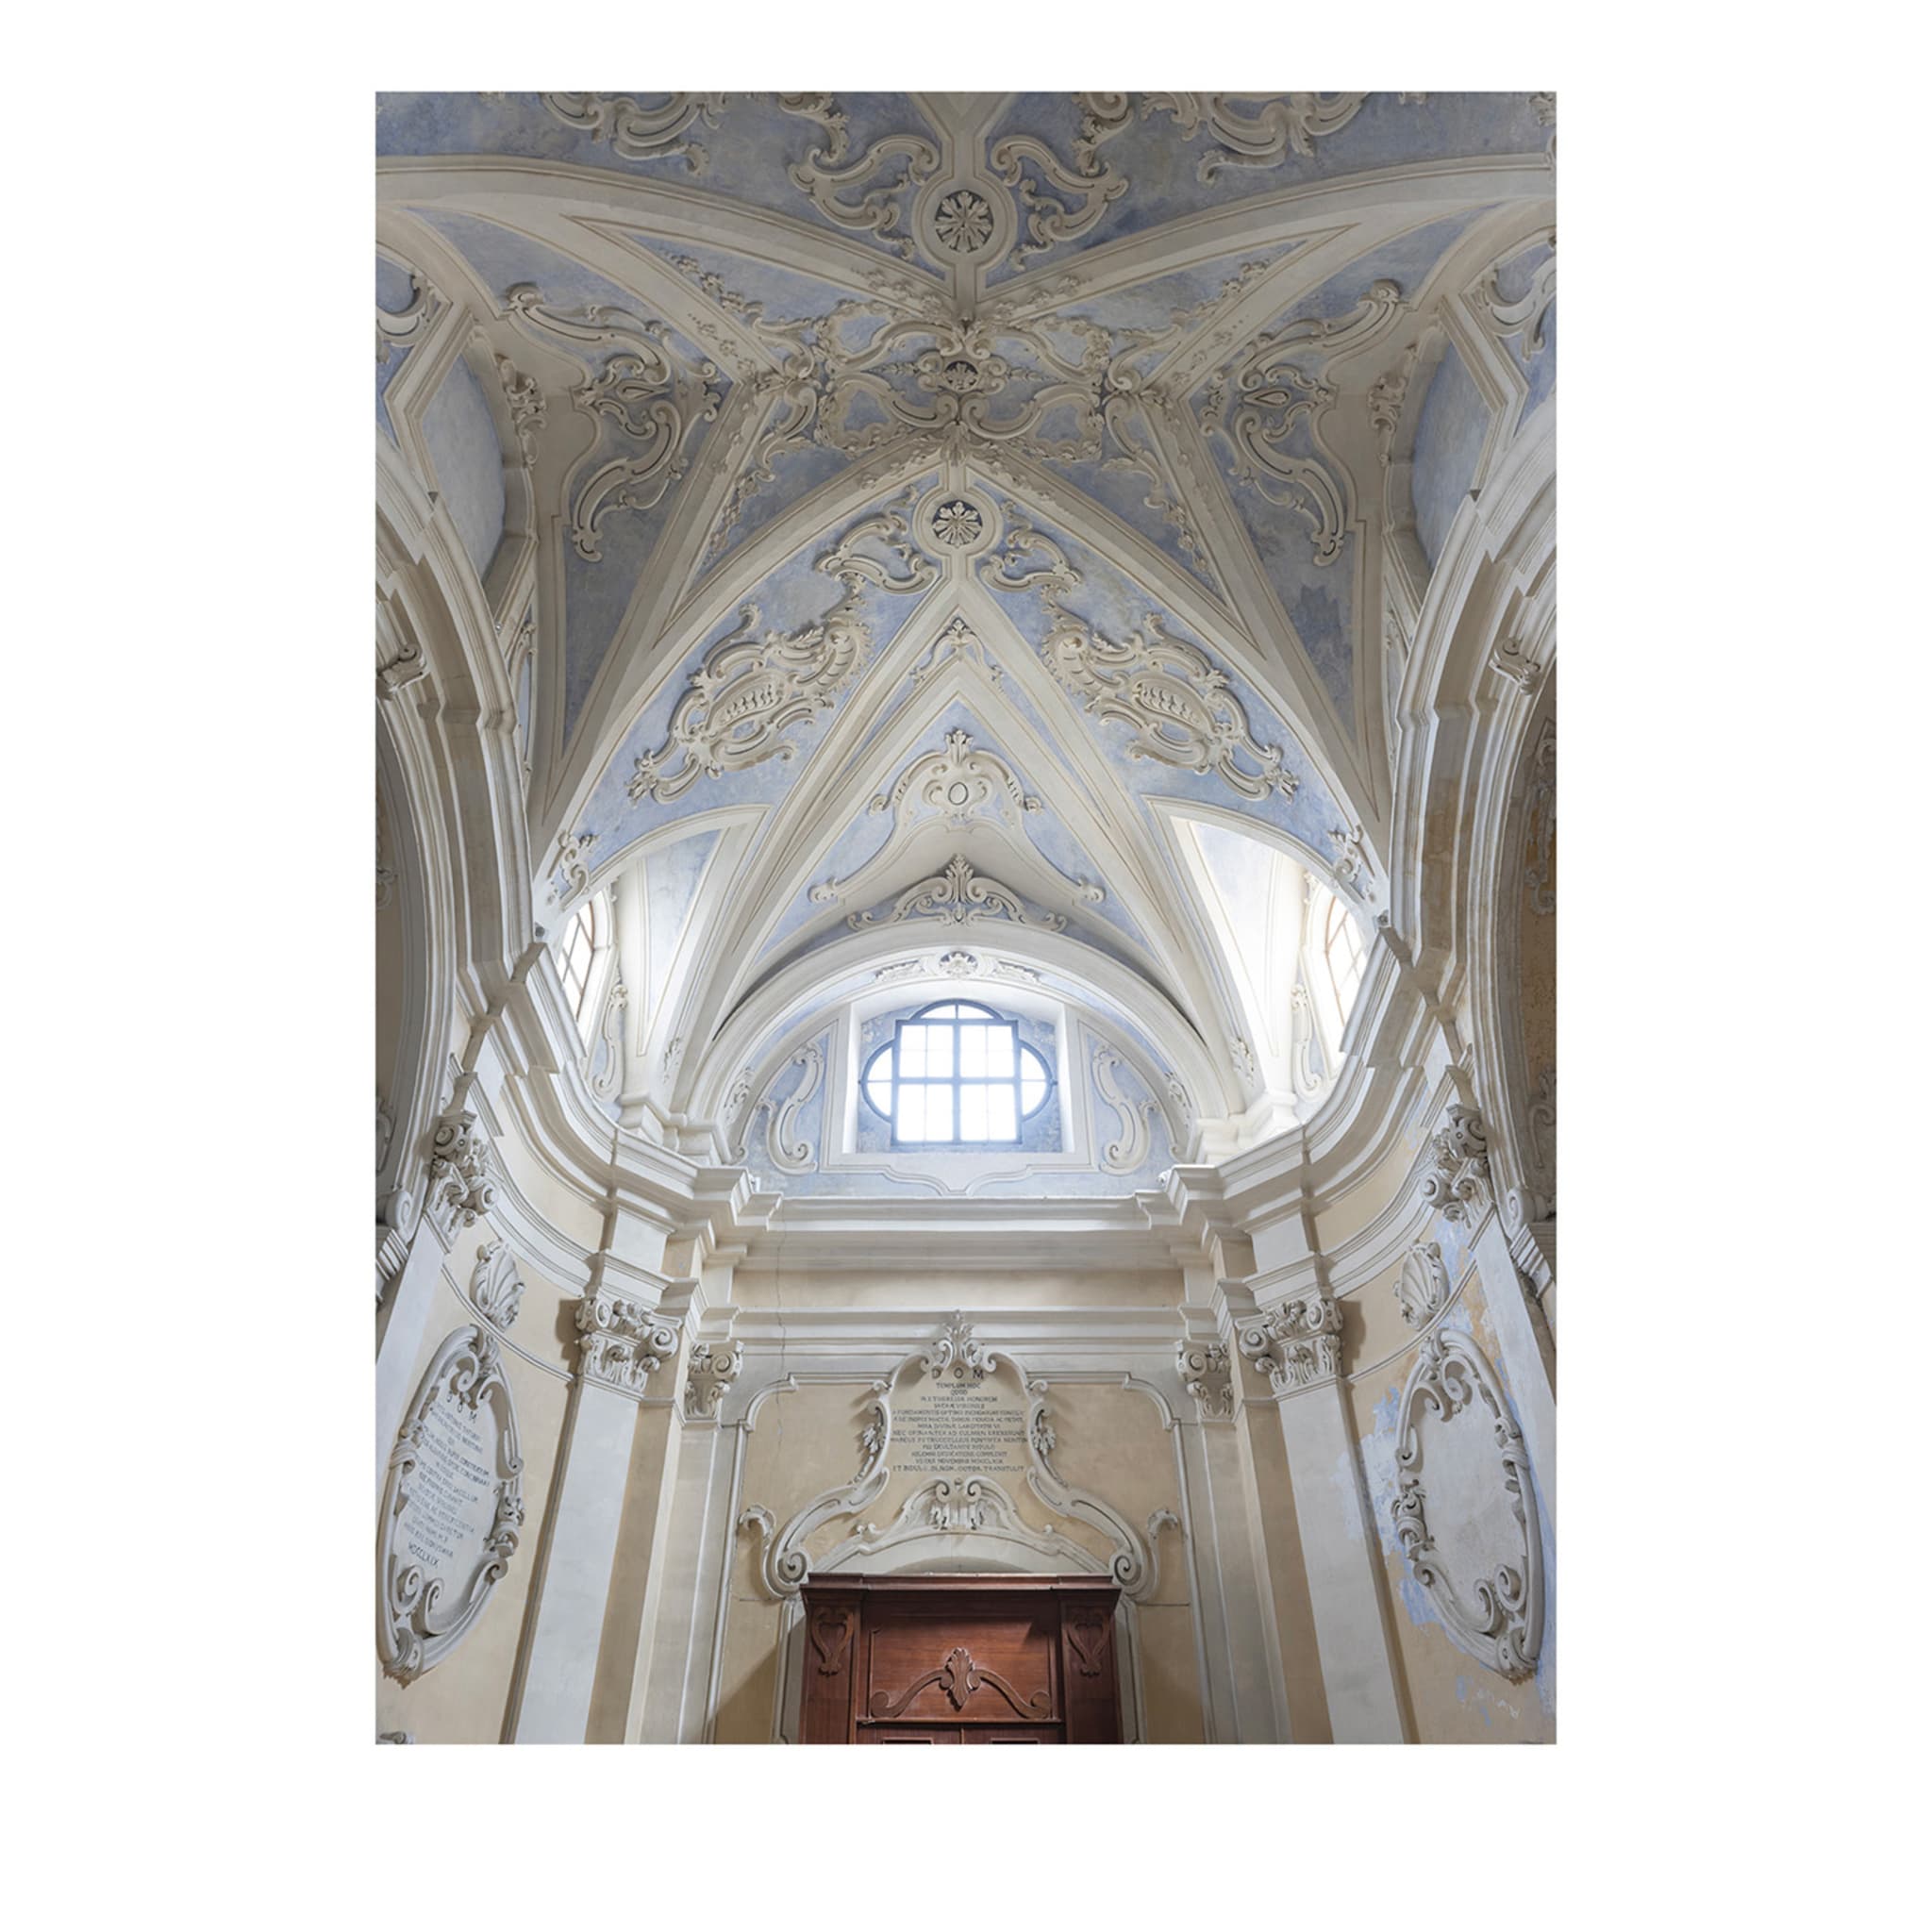 Vaulted ceiling of the Church of Saint Teresa Photographic Print - Main view